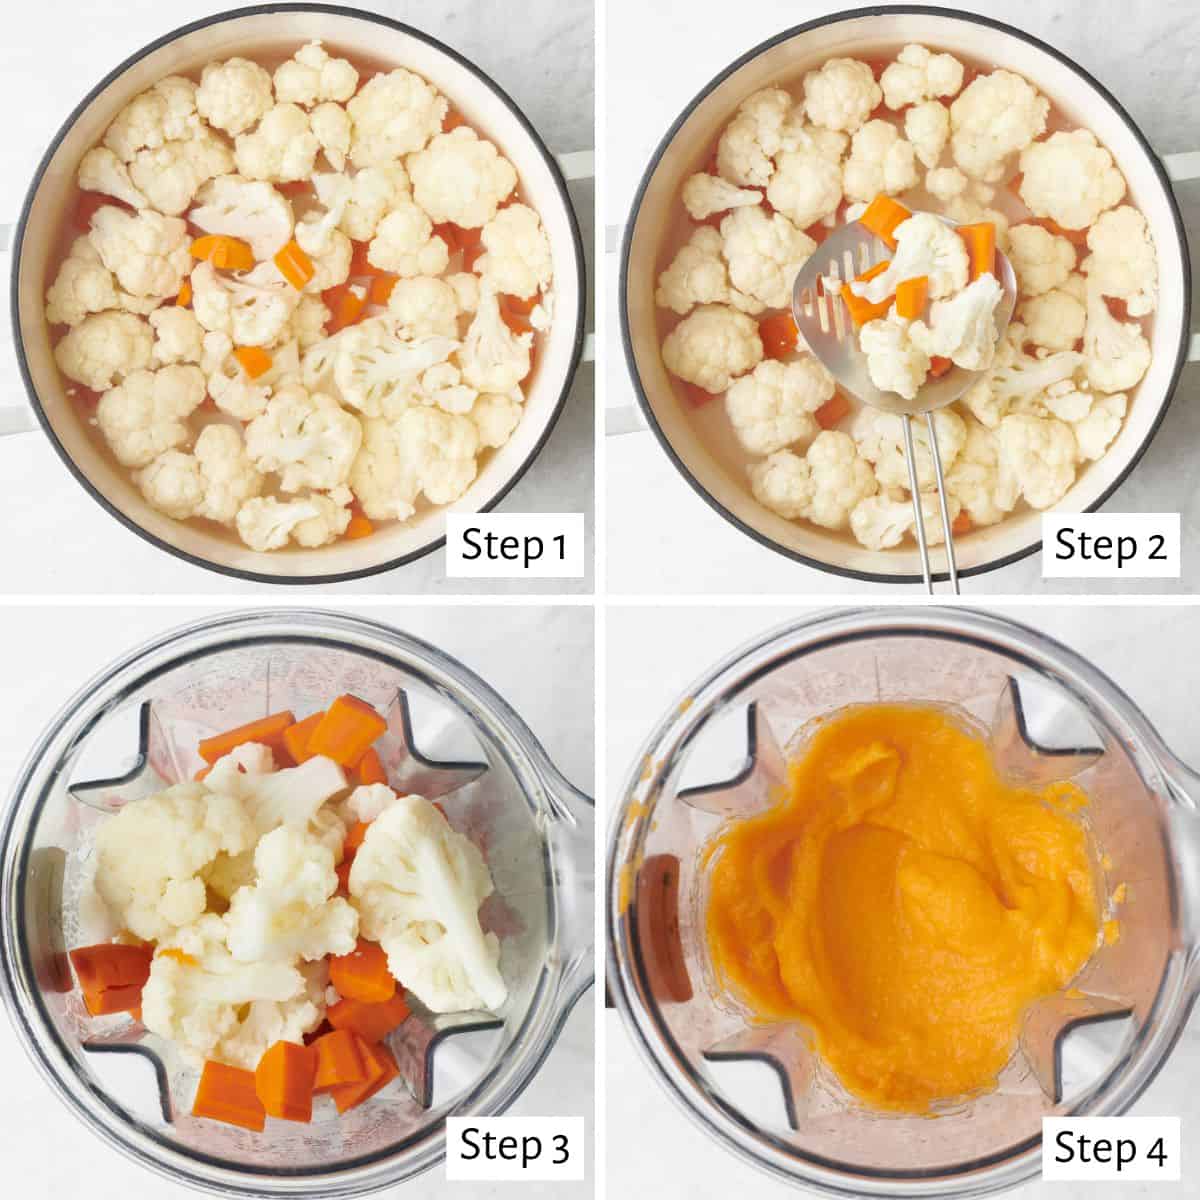 4 image collage making recipe: 1- cauliflower and carrots in a pot, 2- after cooking with a slotted spoon lifting some up, 3- adding blanched veggies to a blender, 4- after blending.